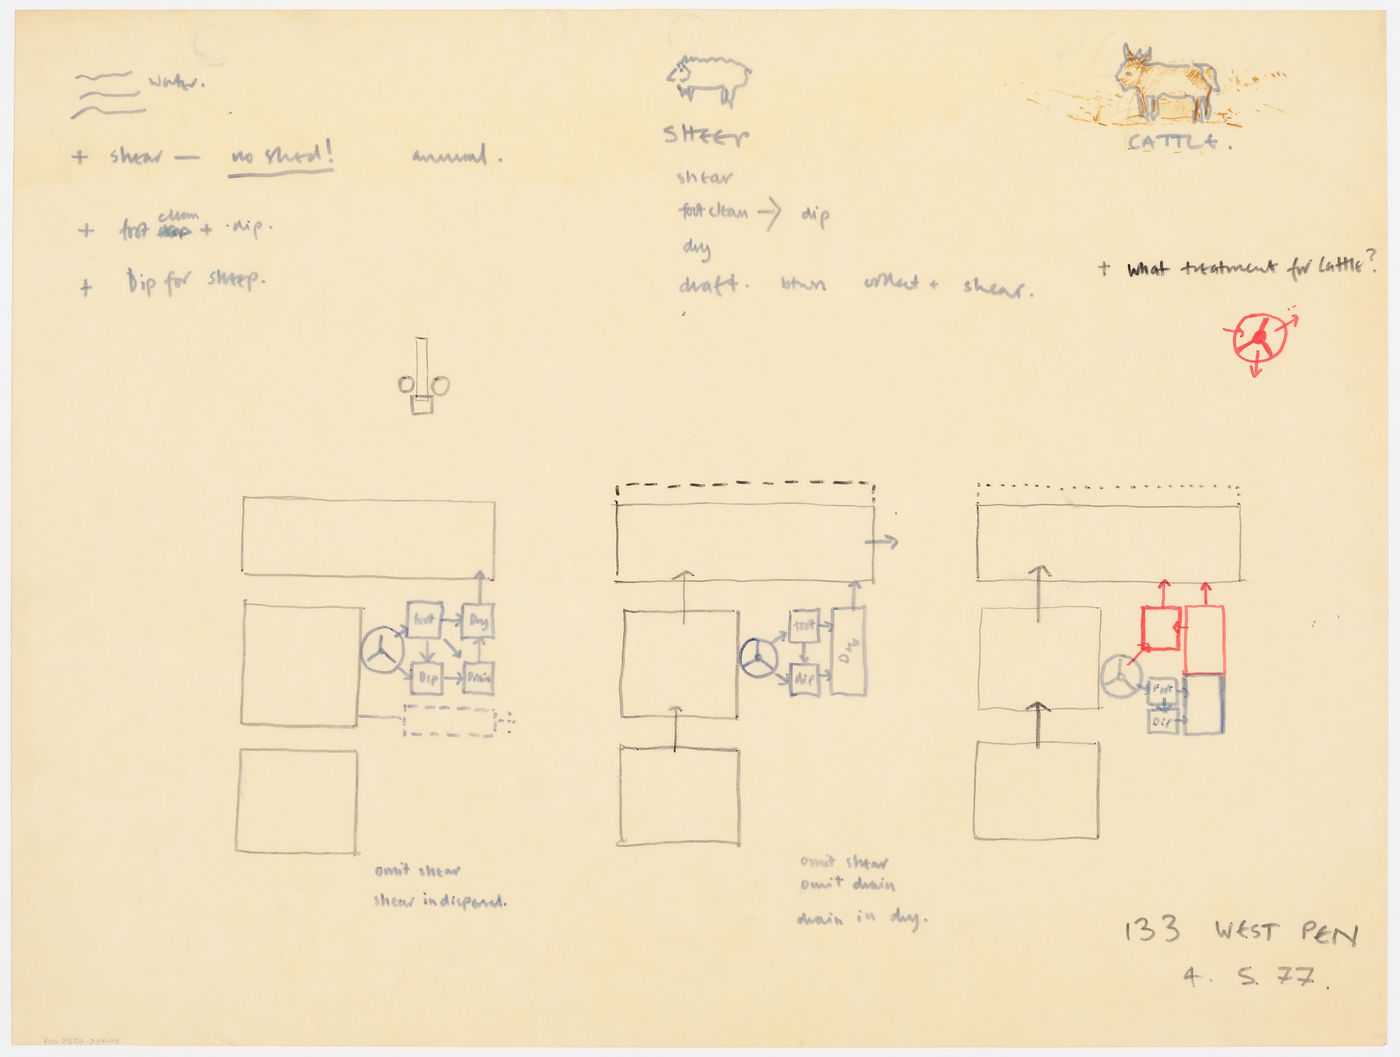 Diagrammatic plans for livestock pens with notes related to treatment of sheep and cattle (document from Westpen project records)